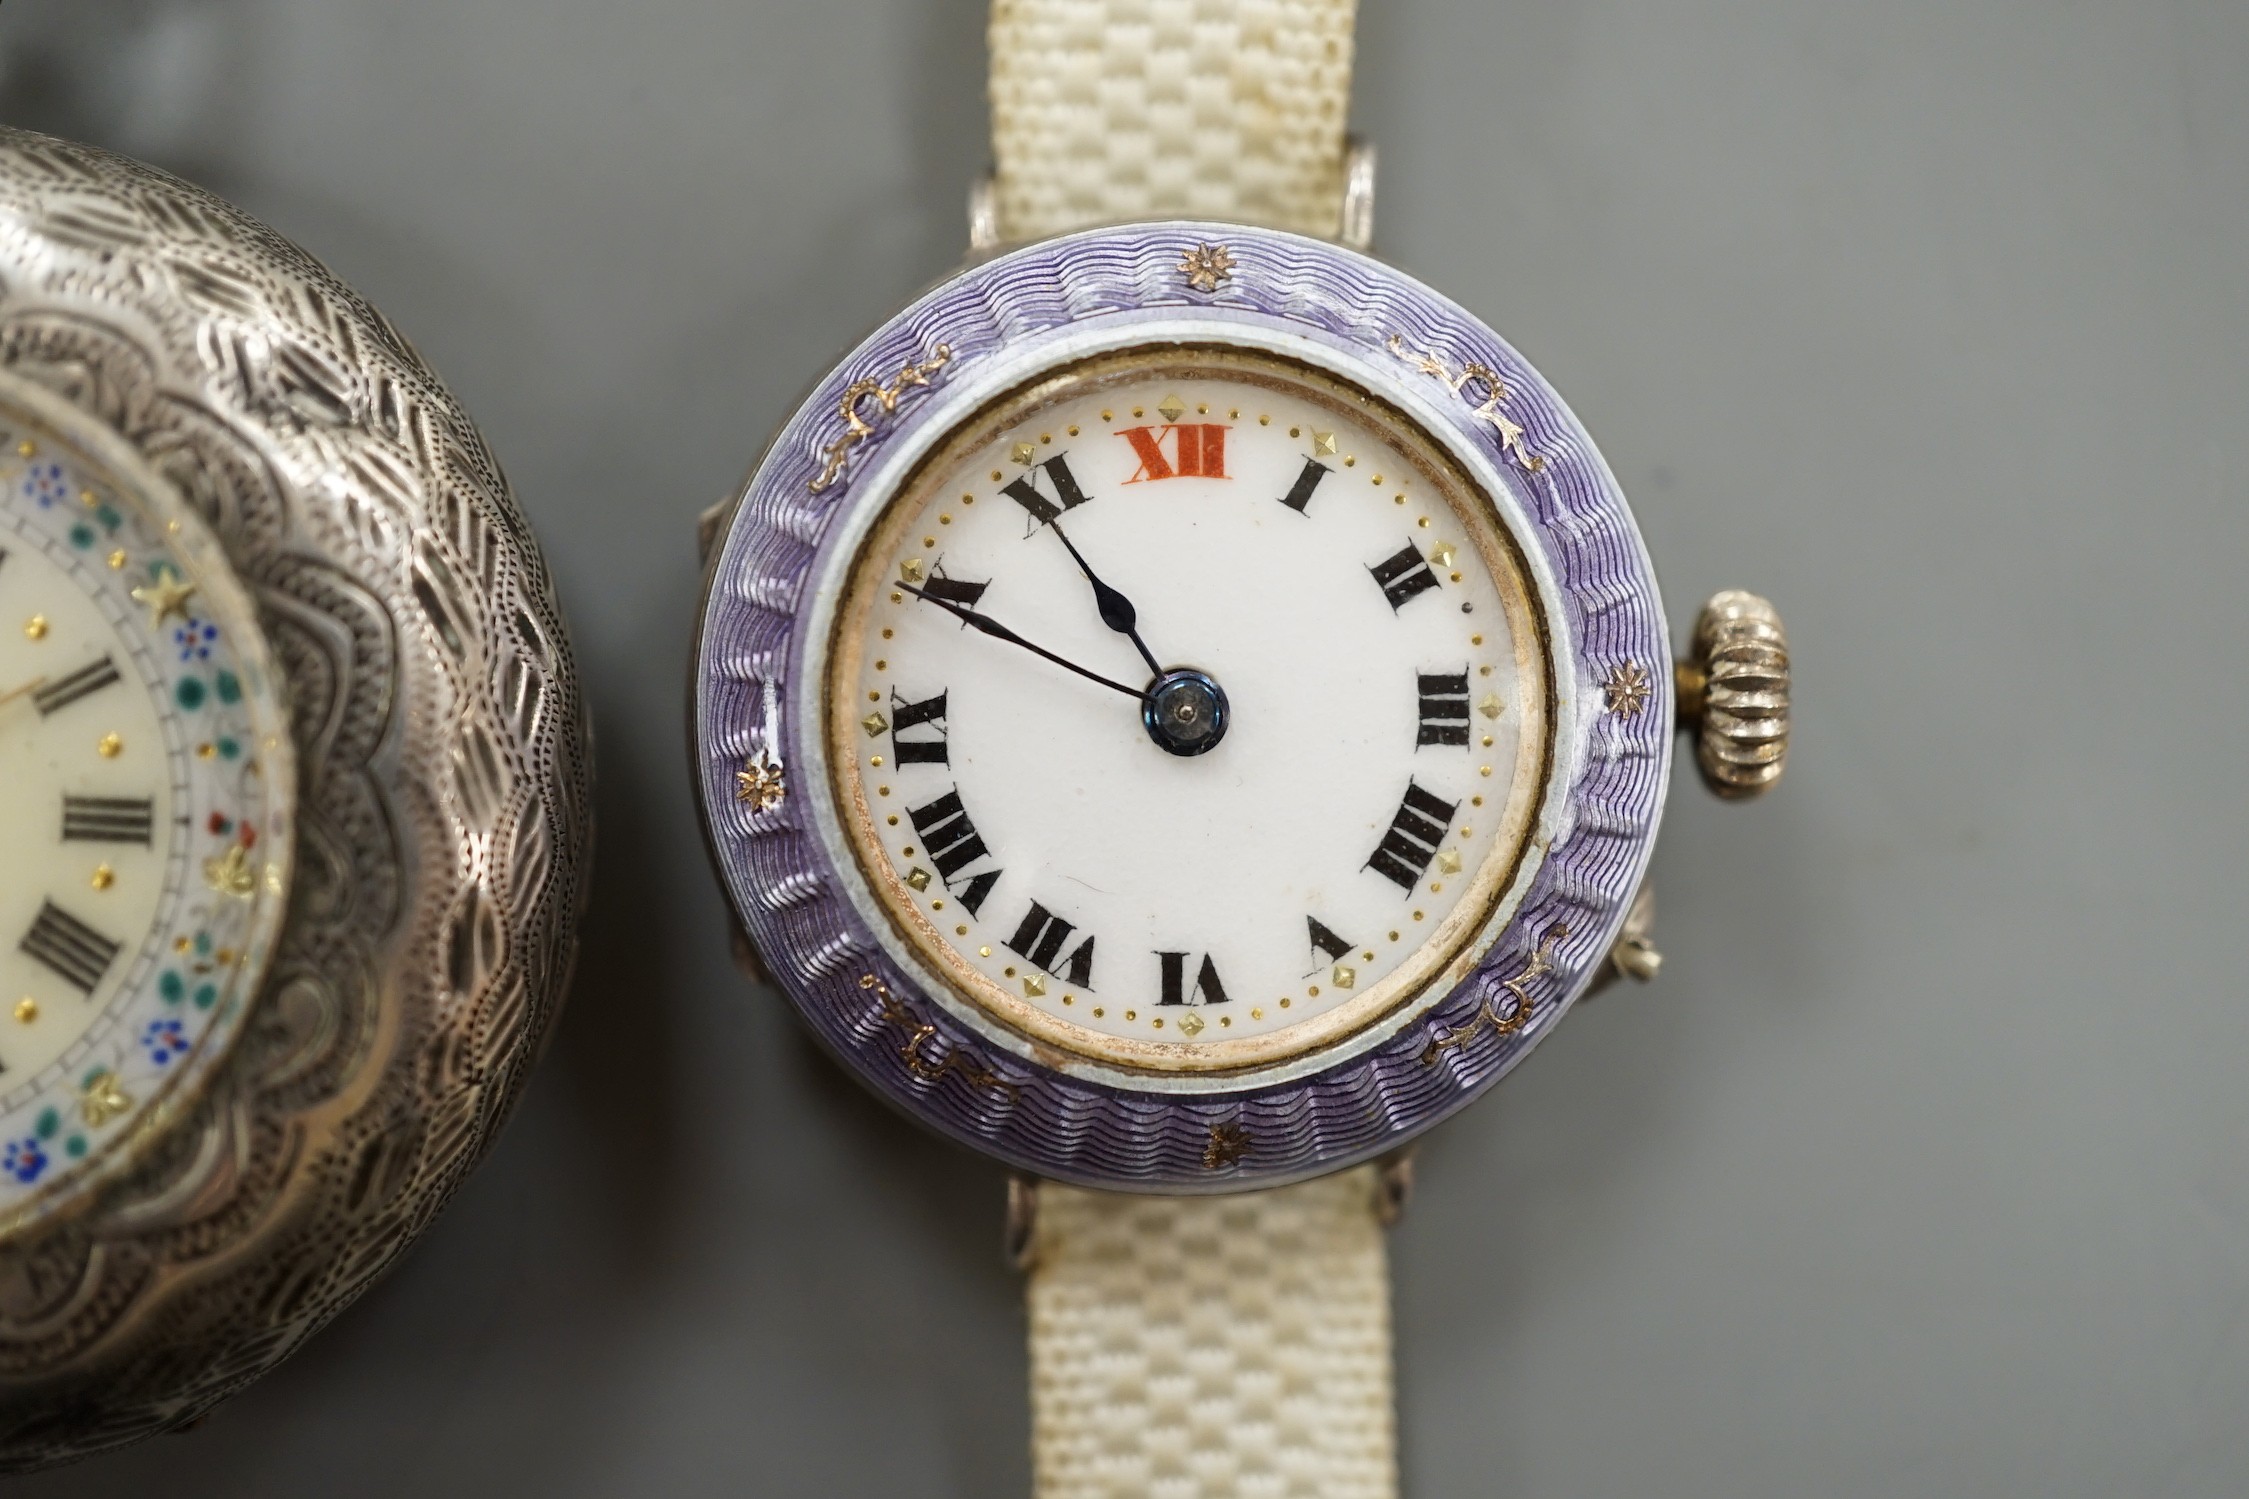 A lady's early 20th century silver and enamel manual wind wrist watch and an 800 standard white metal fob watch.